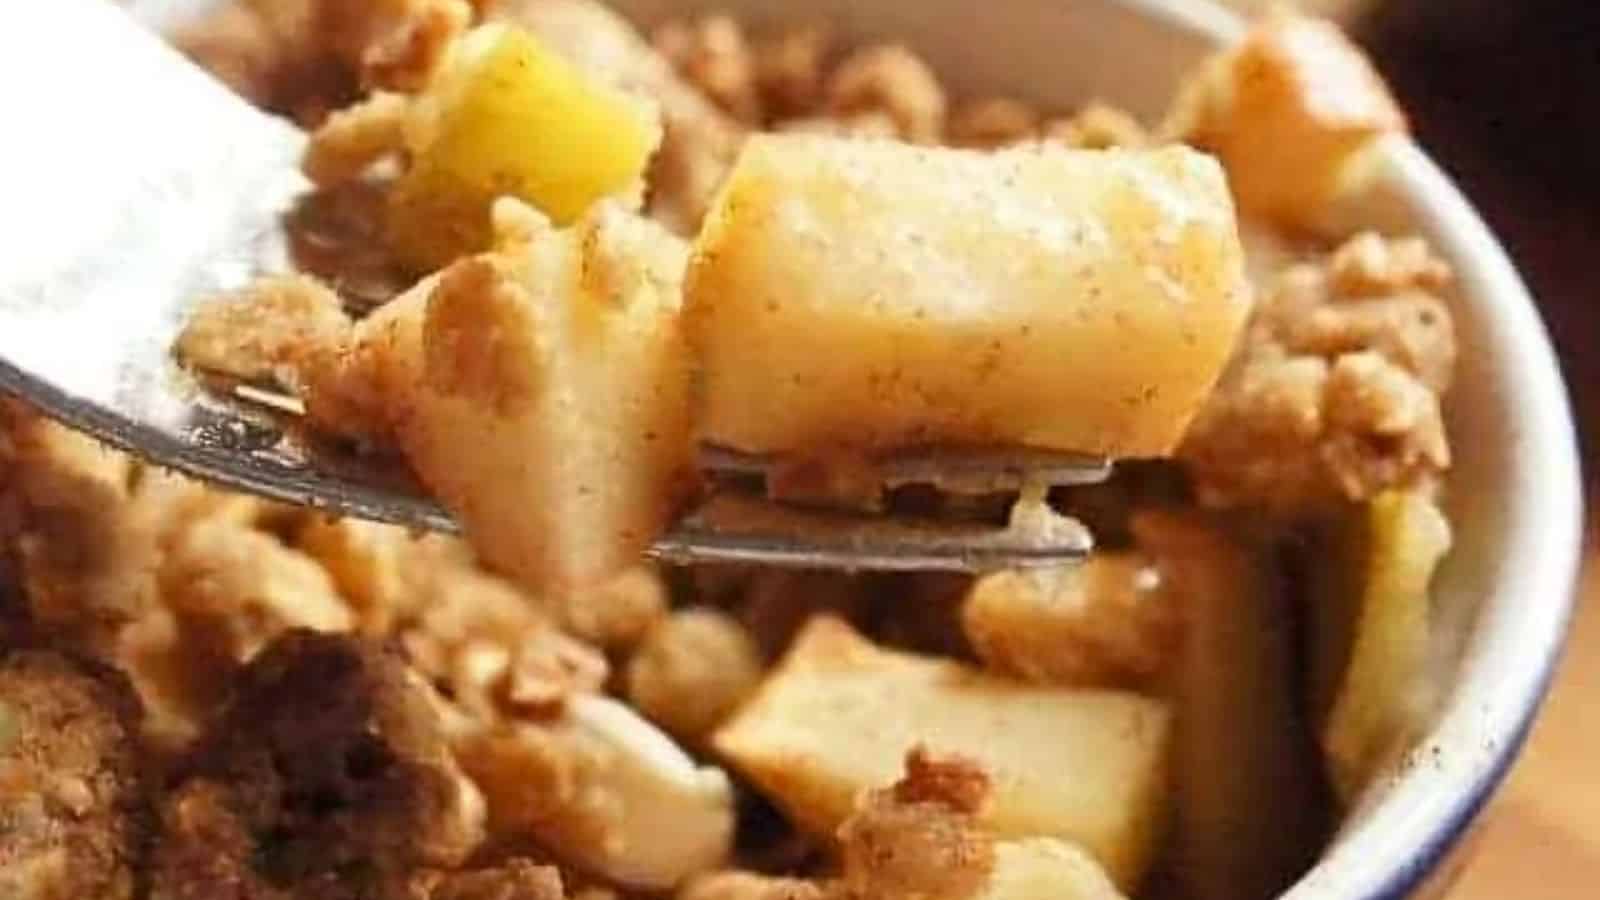 Image shows a close up of a fork holding a bite of Granola Apple Crisp with the whole serving behind it.